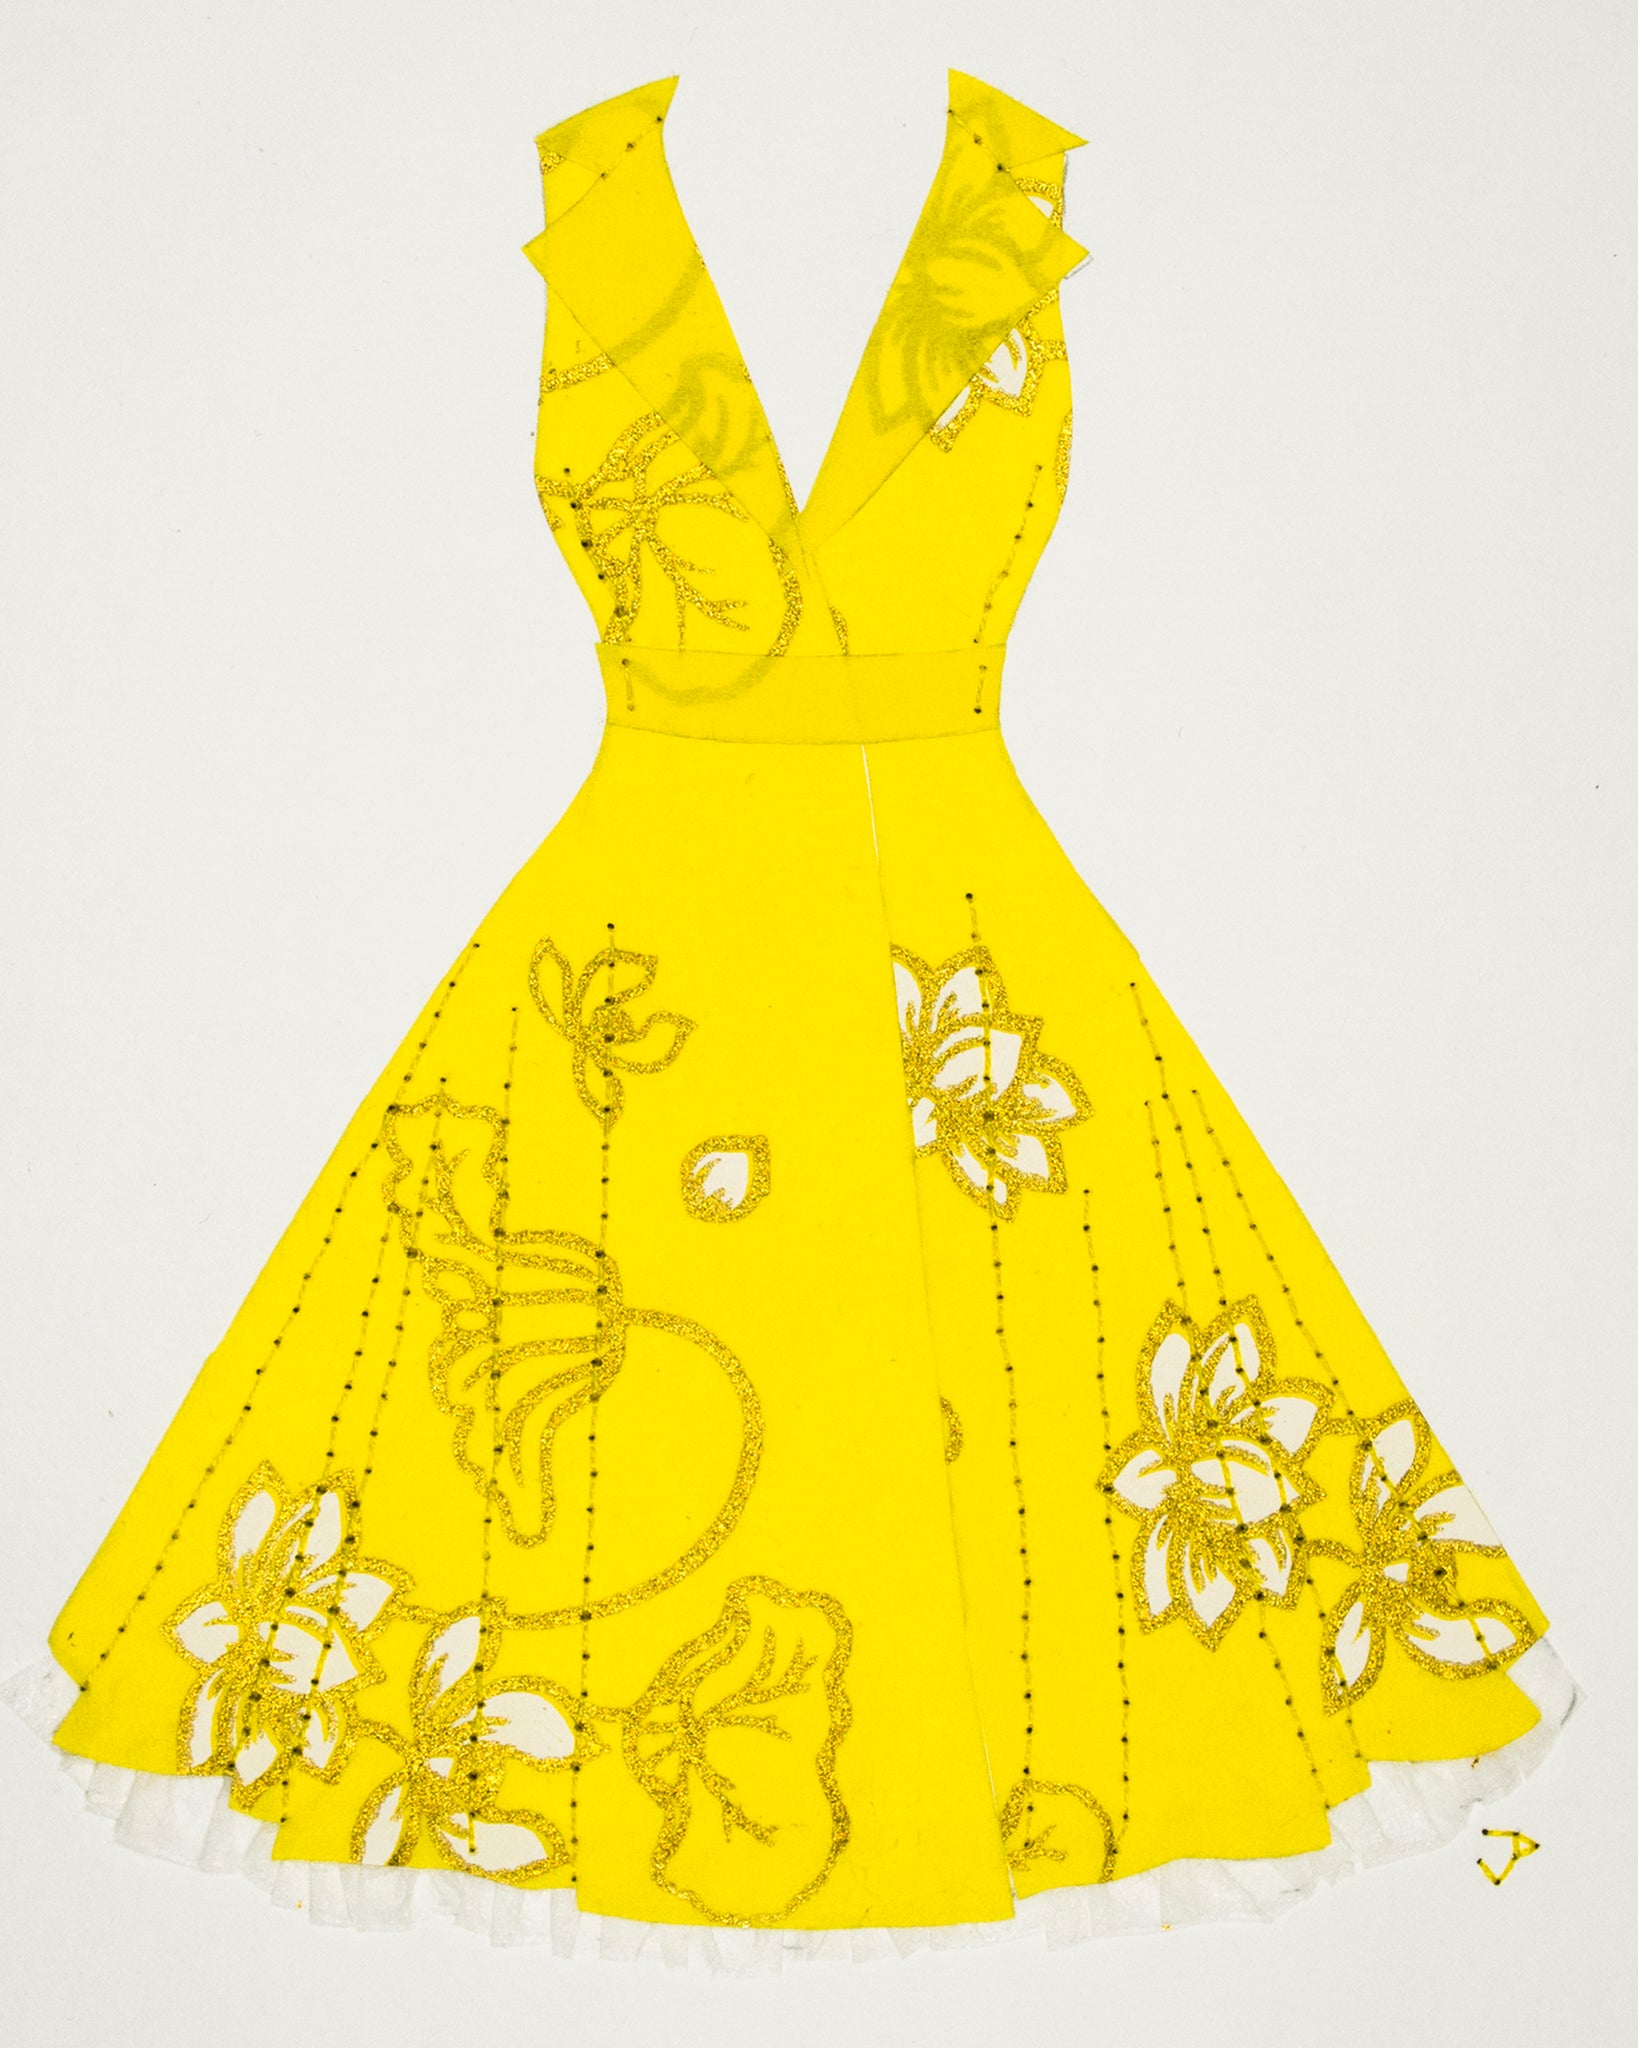 Pinup #020: Pinup dress in yellow and gold with crinoline. 2019